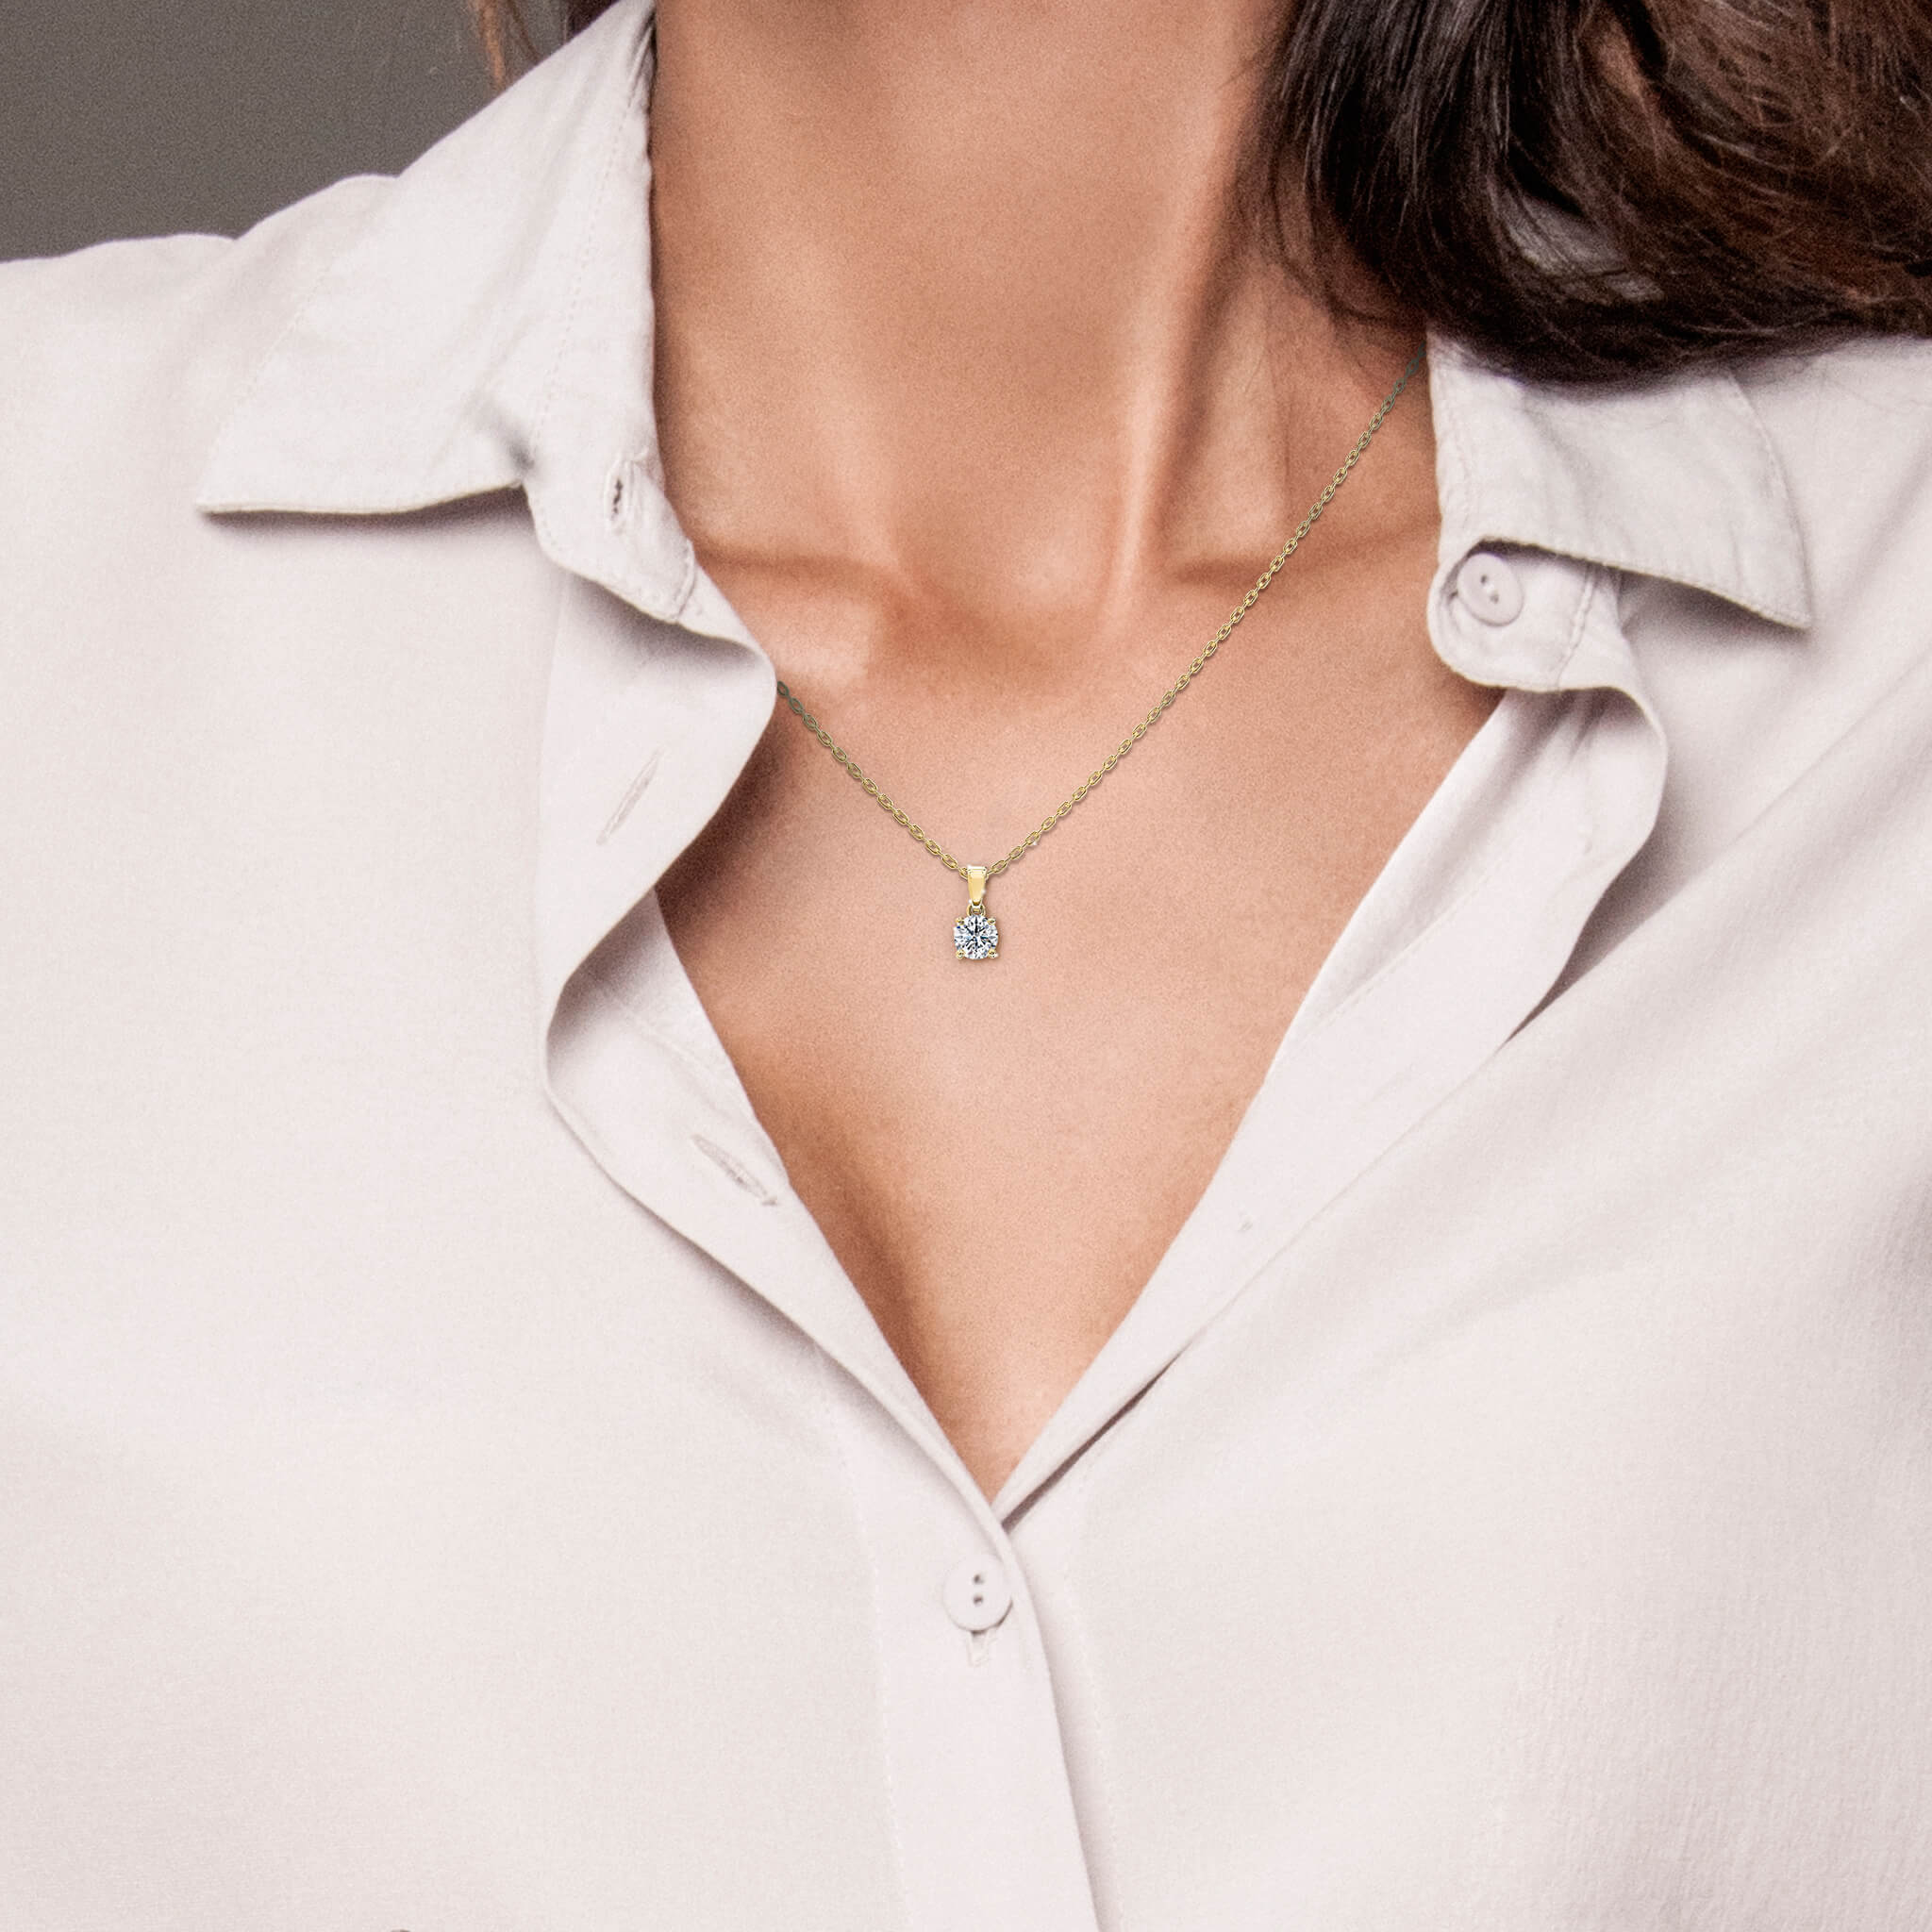 Shimansky - Women Wearing the 4 Claw Solitaire Diamond Pendant 0.40ct crafted in 18K Yellow Gold